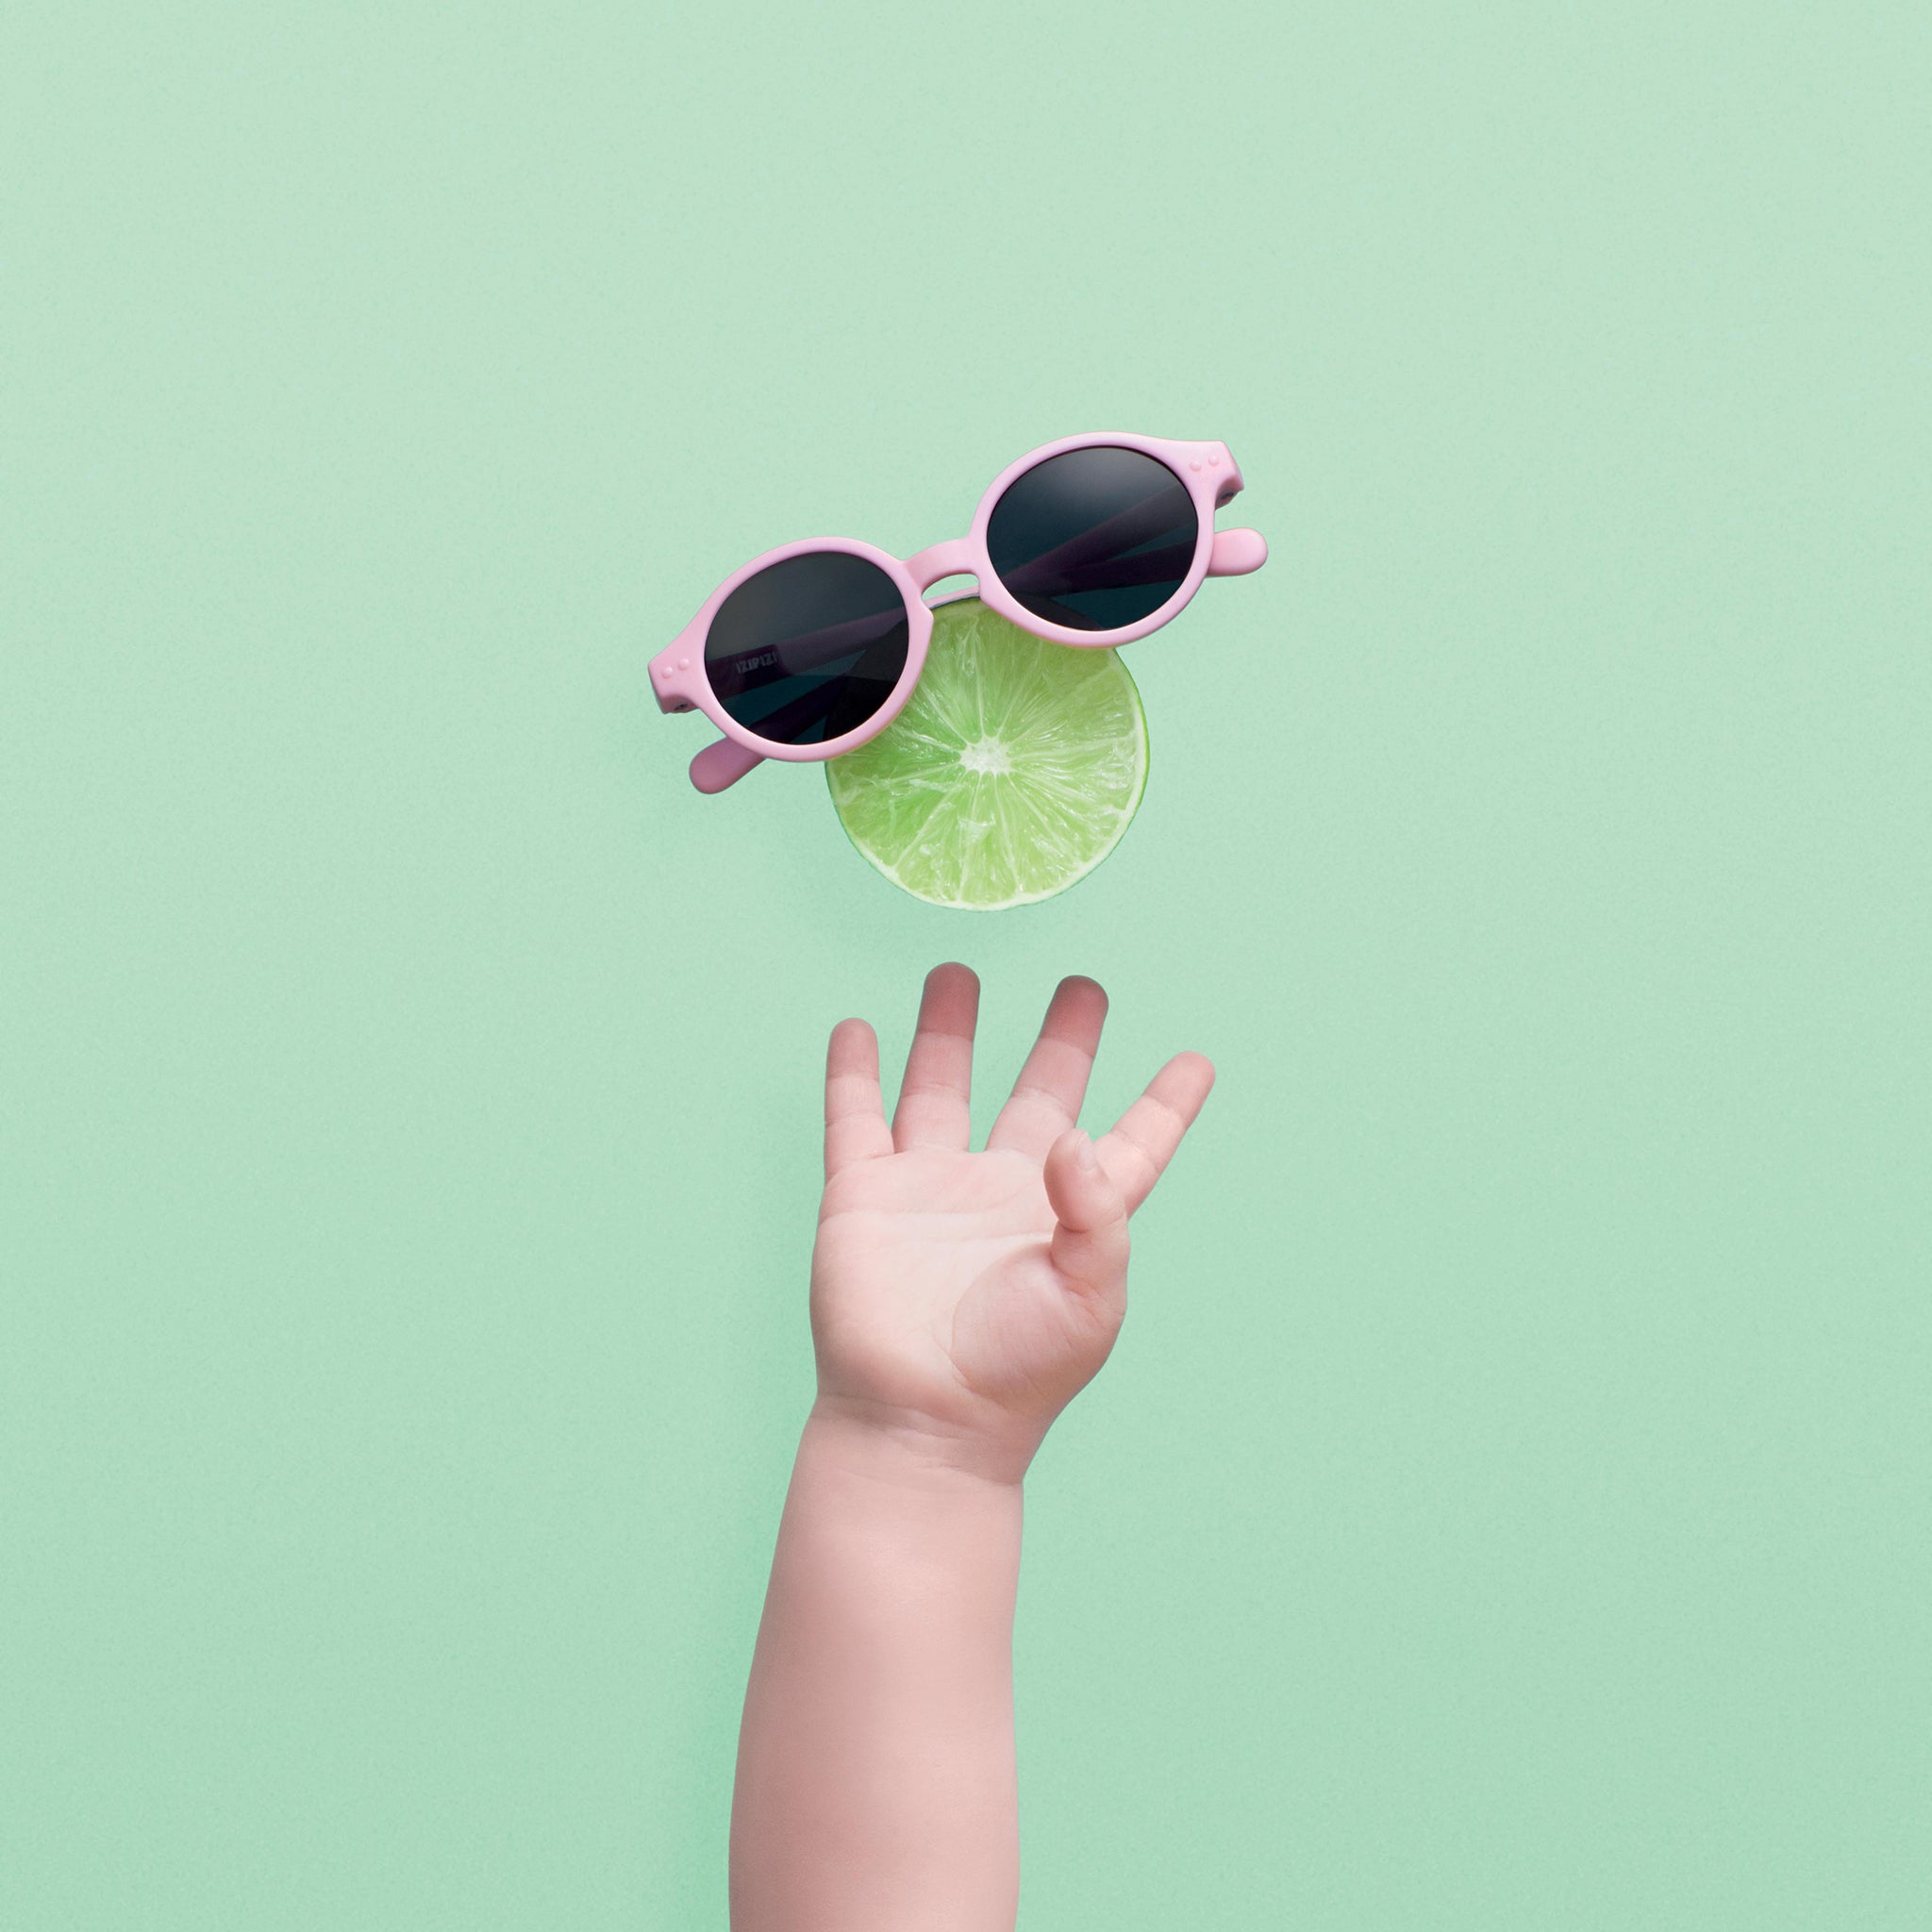 Baby's hand reaching for a half a lime in the air, with pink sunglasses perched on top of lie. Green background 